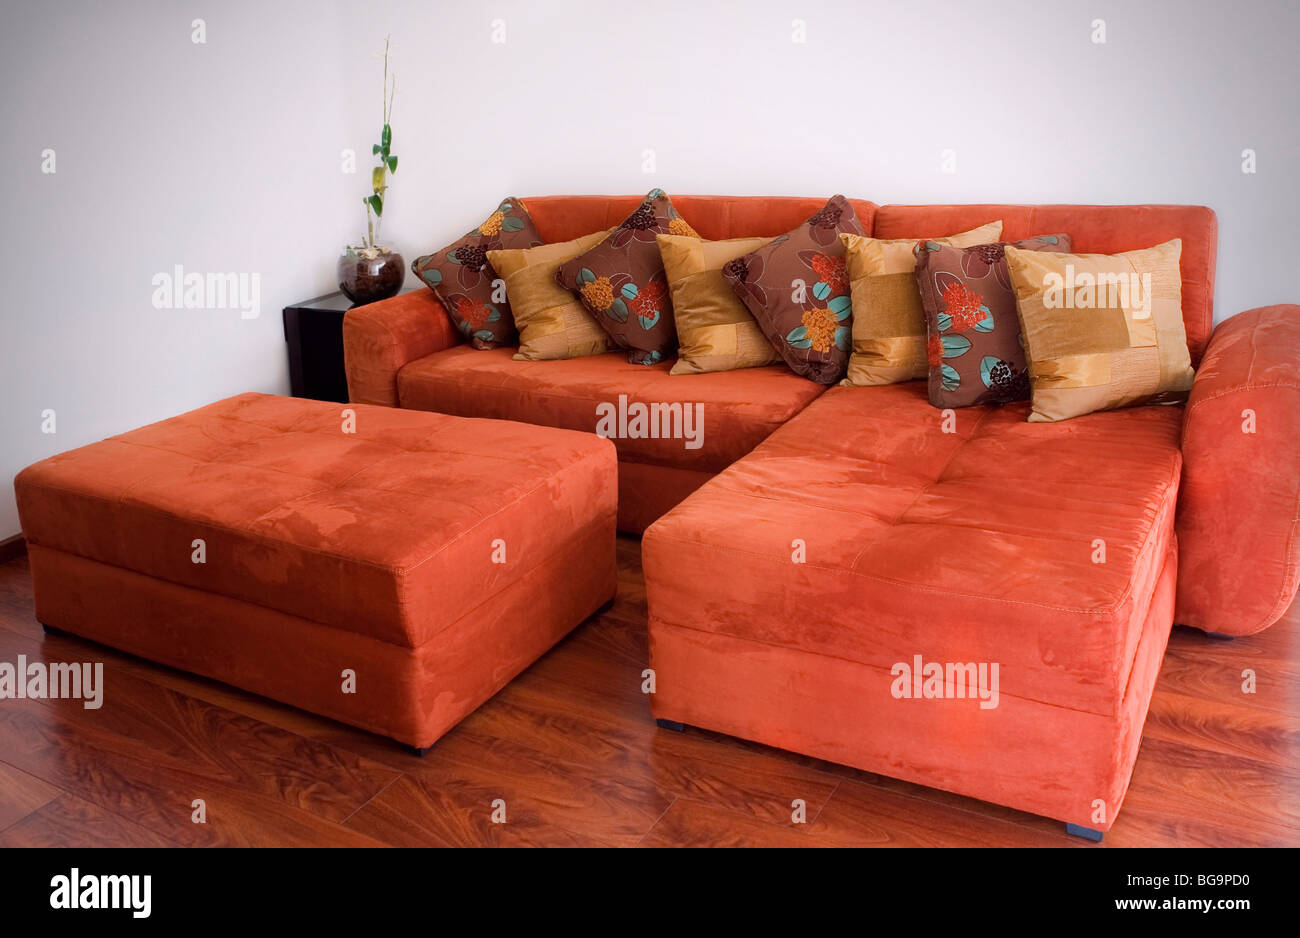 Comfortable orange velvet couch with patterned pillows Stock Photo